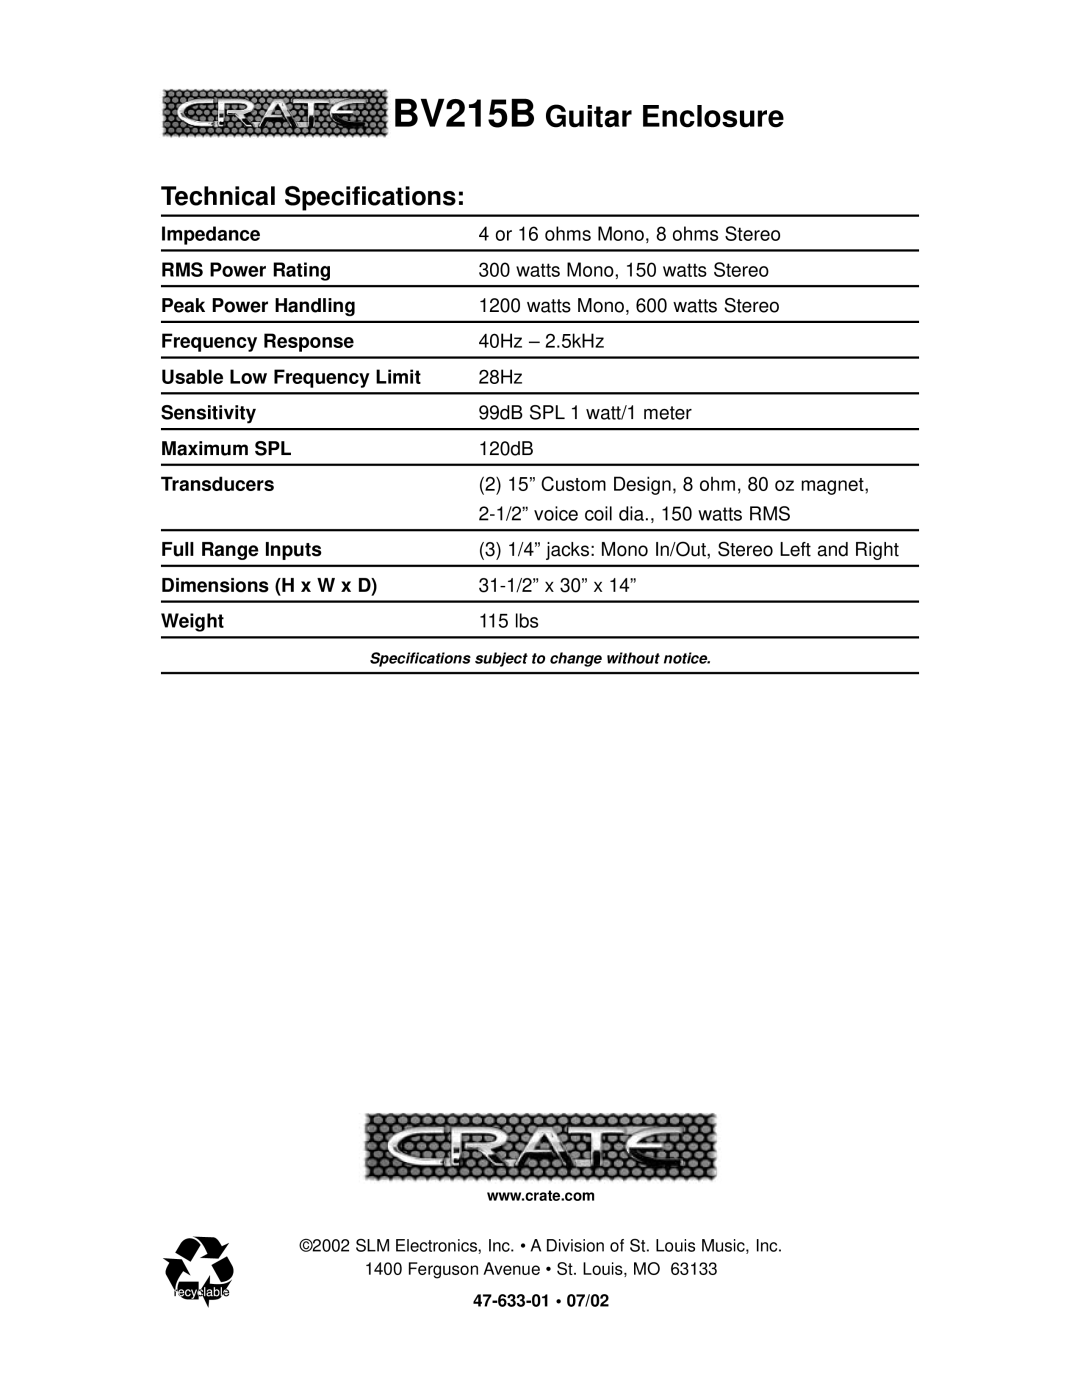 Crate Amplifiers BV215B manual Technical Specifications 